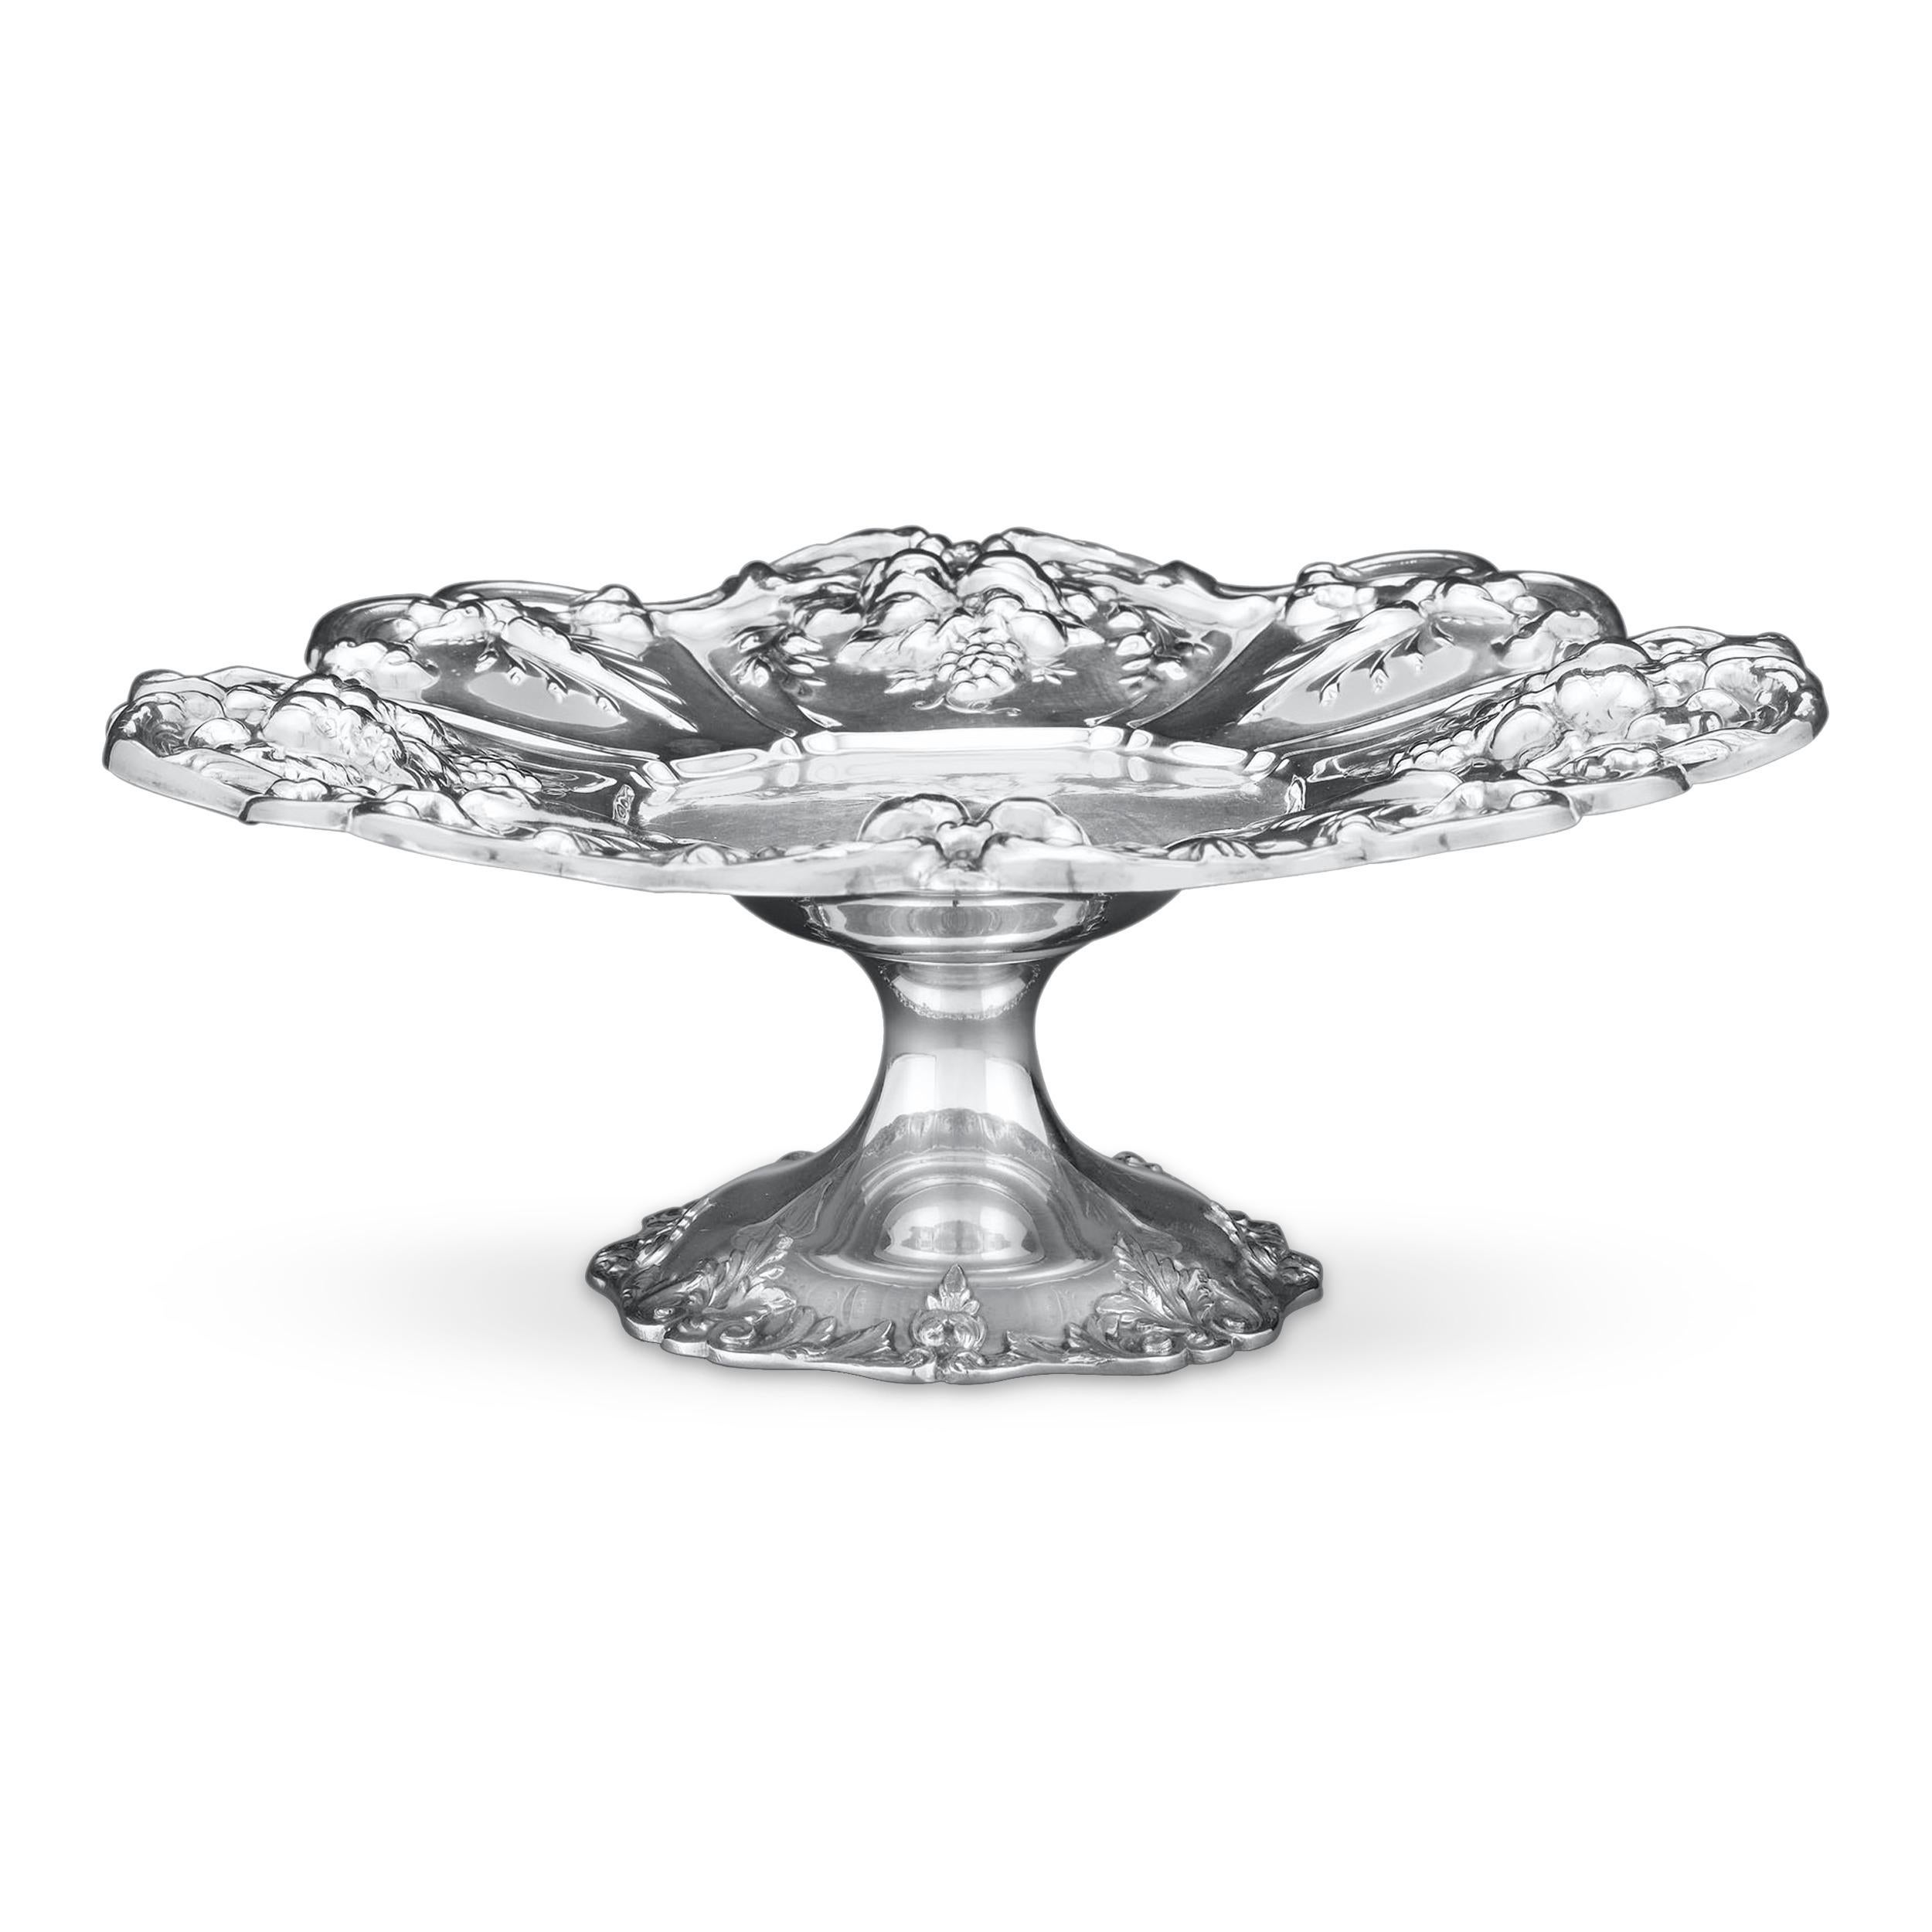 This charming silver compote by Reed & Barton is crafted in that renowned firm’s Francis I pattern. Skillfully-répousséd classic shapes and applied, hand-cast mounts of fruits and flowers distinguish this elegant dish. Introduced by the company in